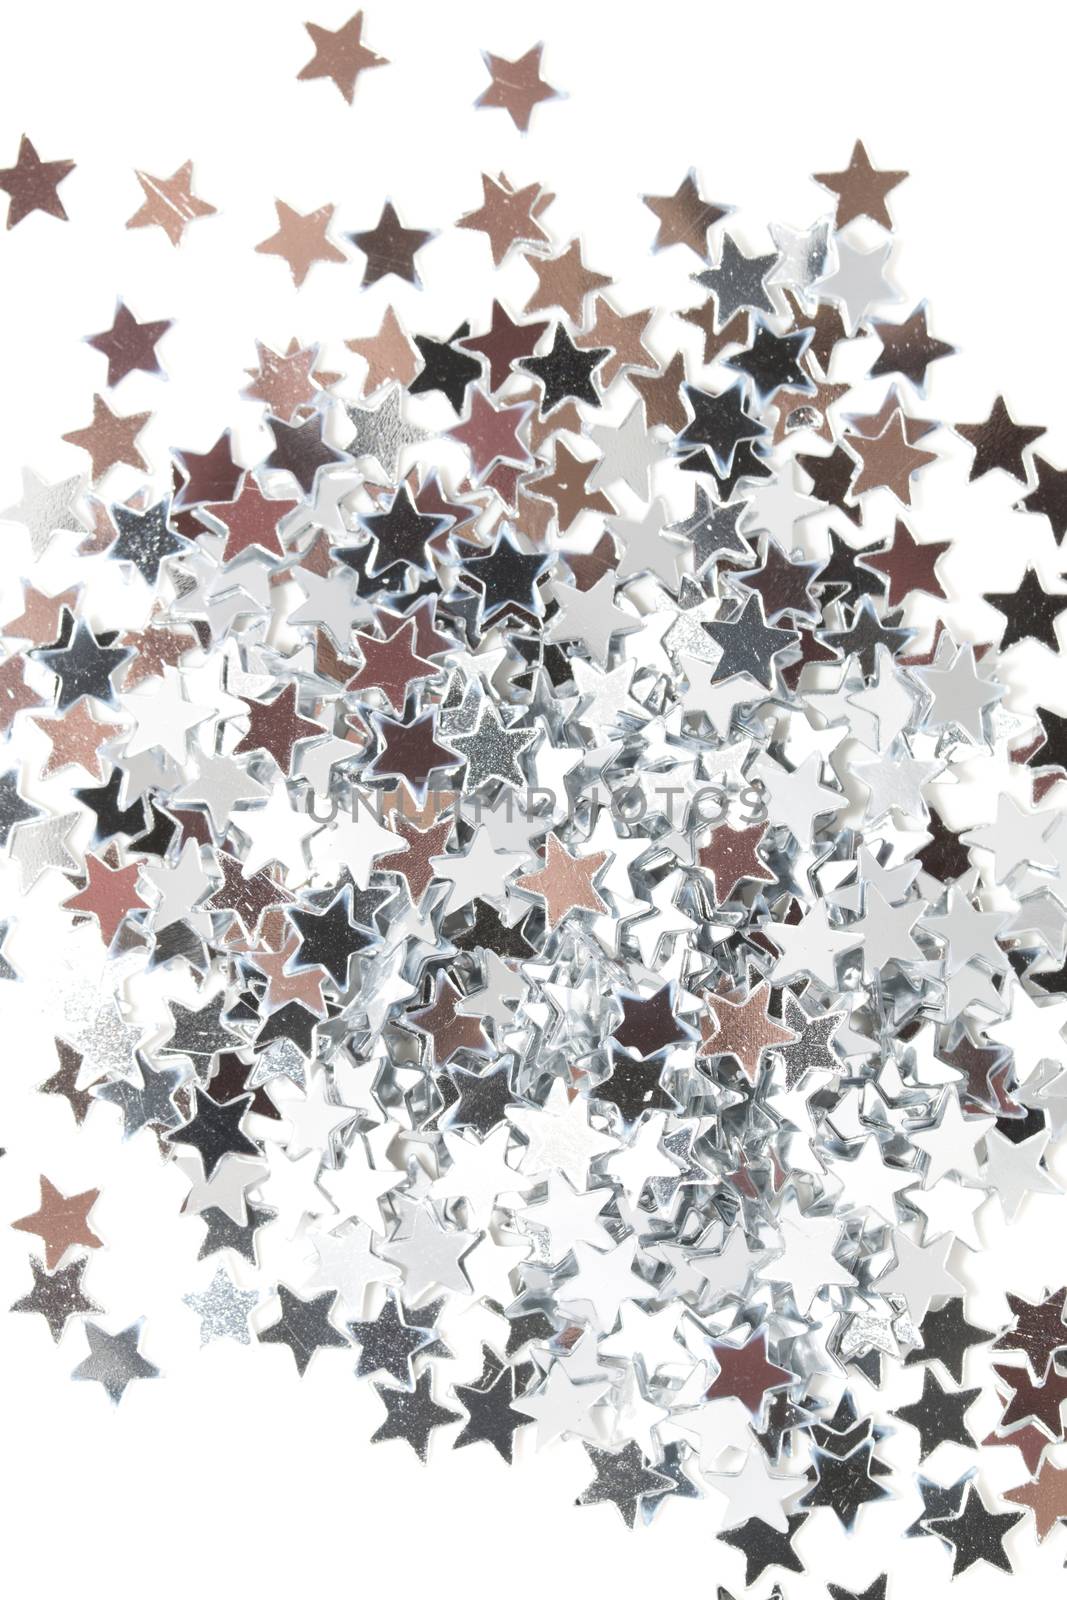 Golden and silver stars on white background